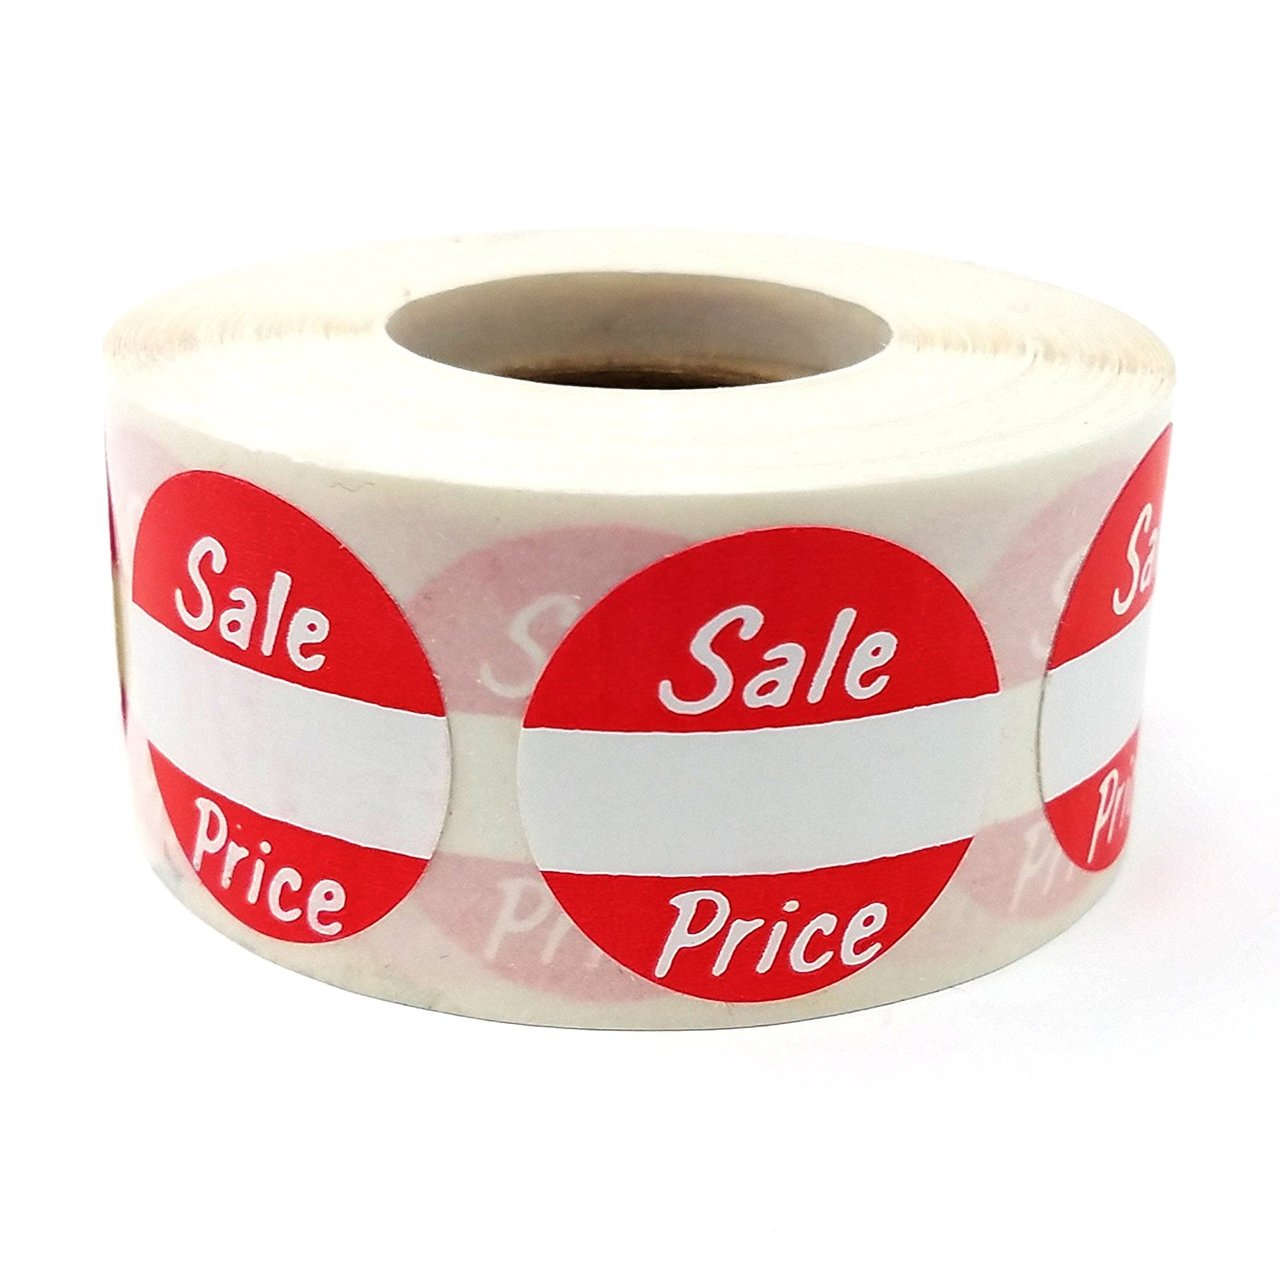 500 Self-Adhesive Sales Price Round Retail Labels 1" Stickers Tags Sale Price 